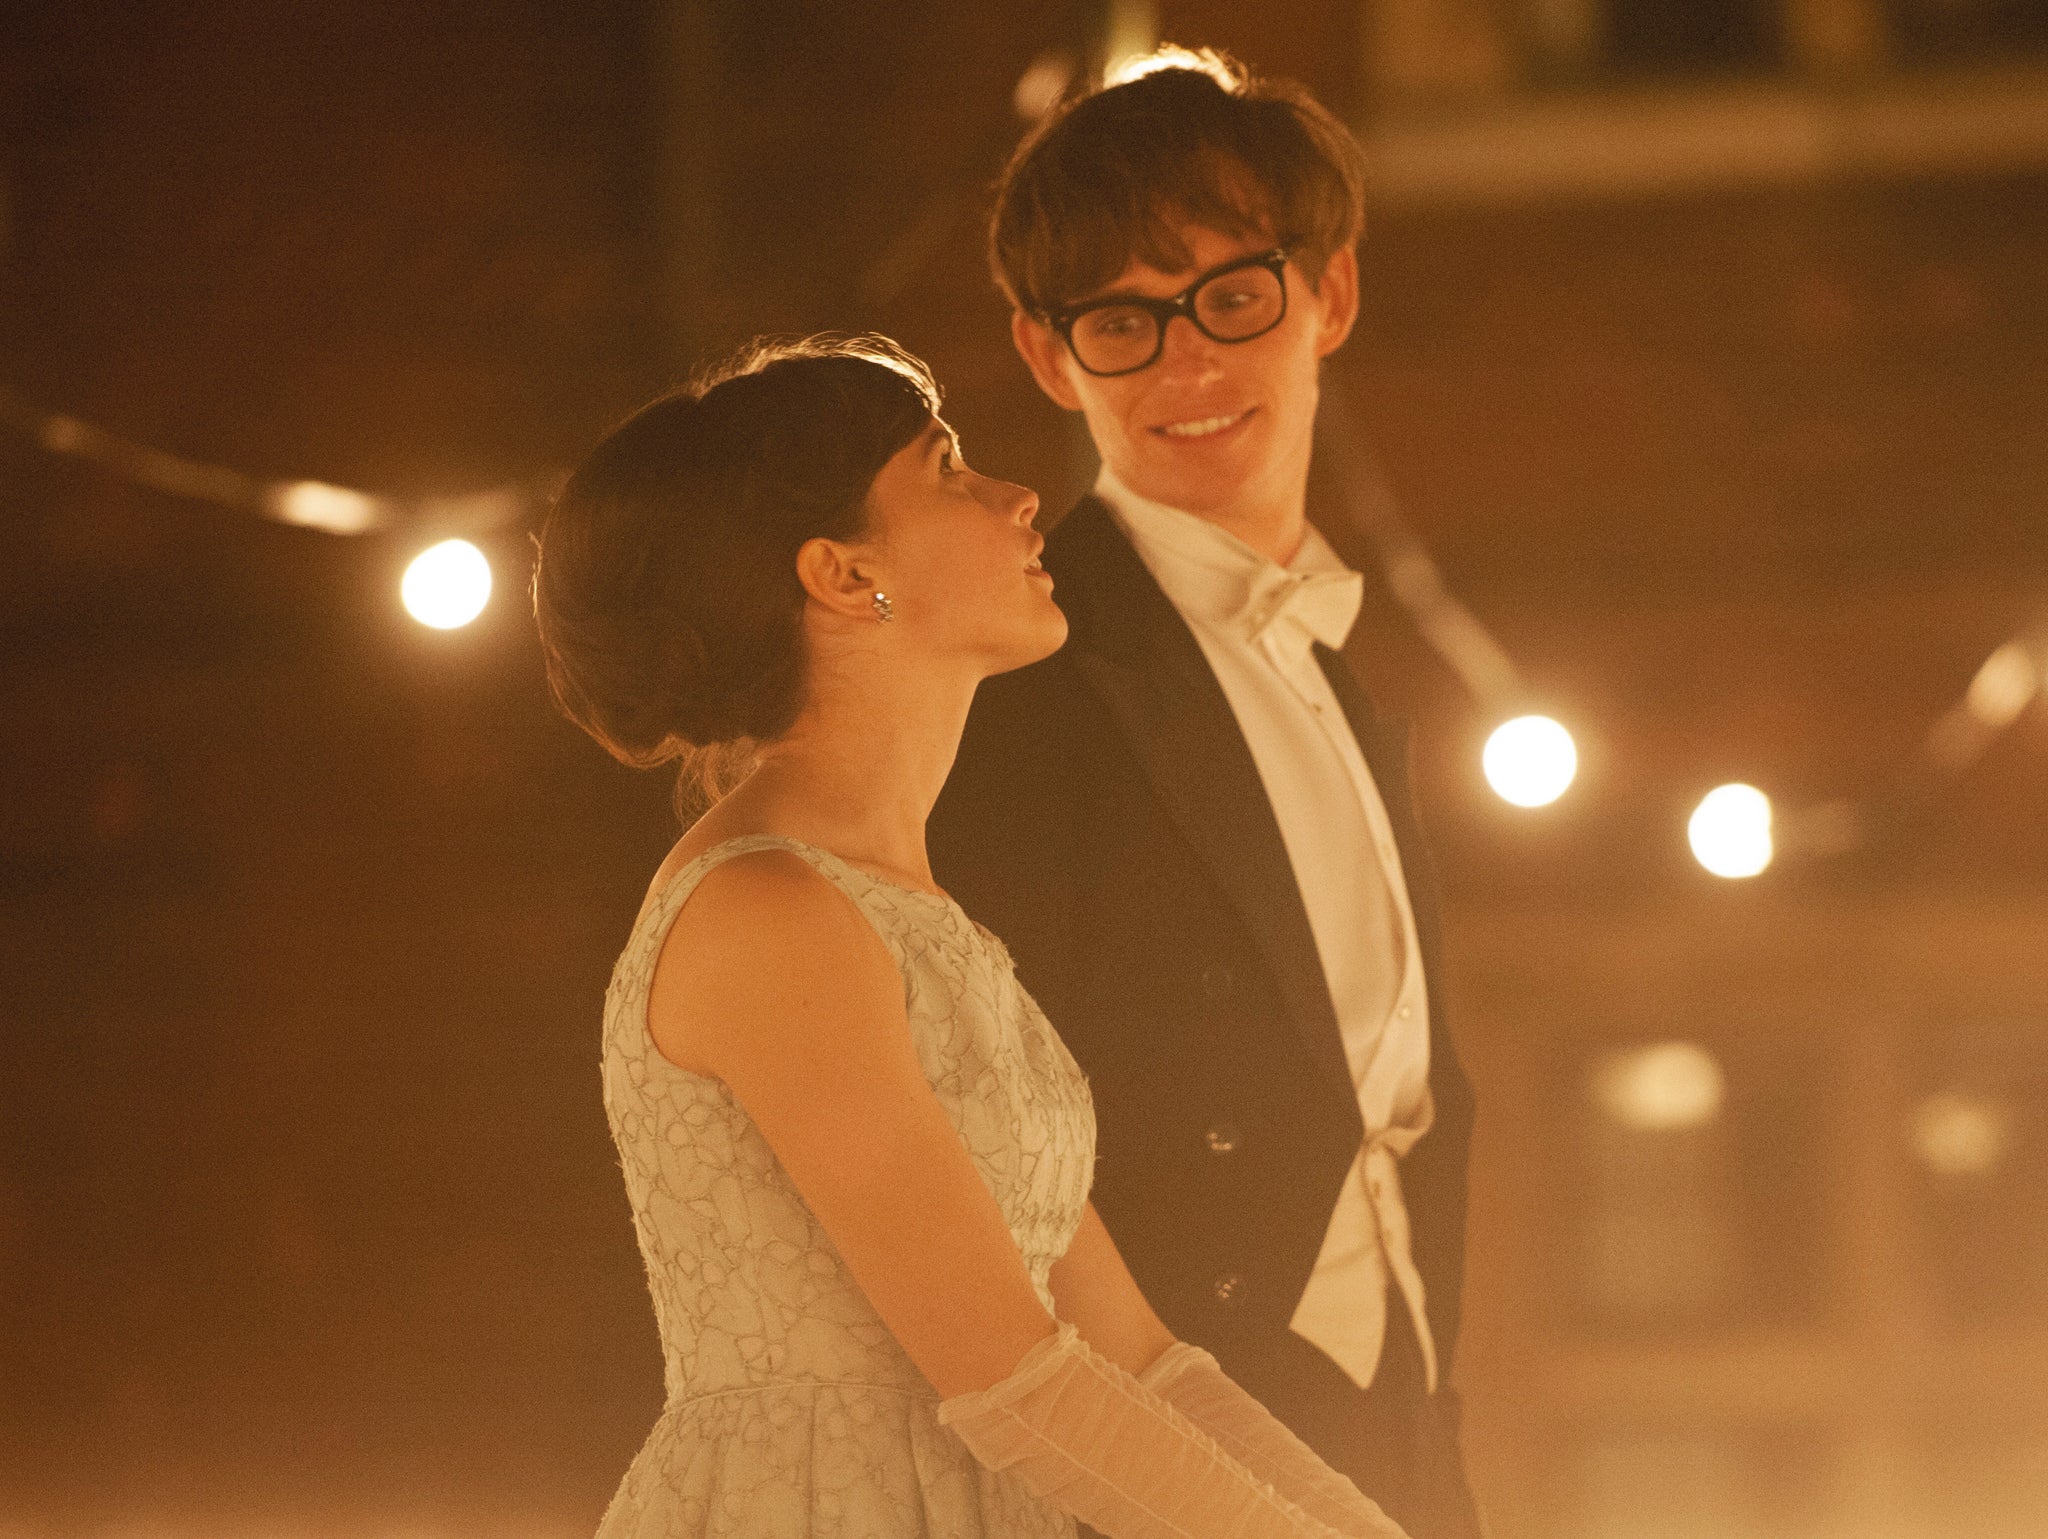 Felicity Jones and Eddie Redmayne in the forthcoming Stephen Hawking biopic The Theory of Everything